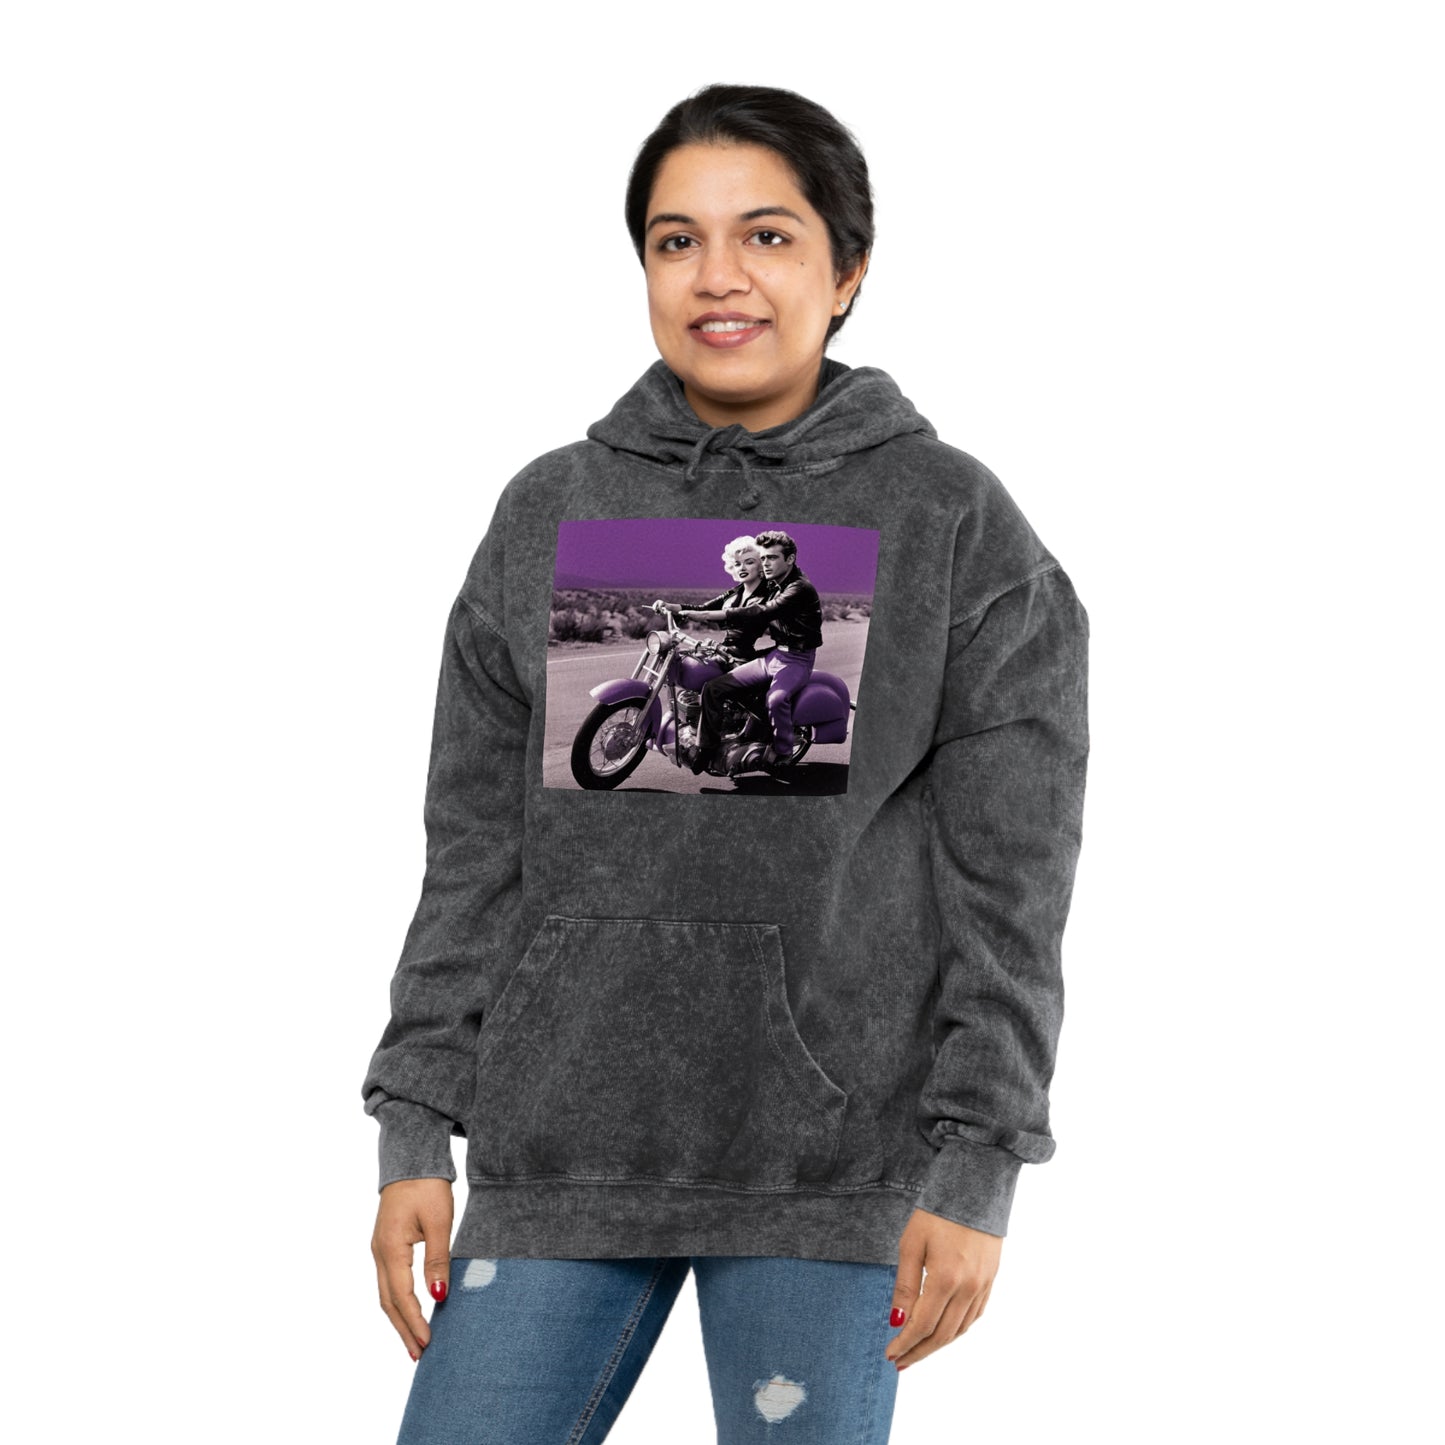 James & Marylnn on a Ride Unisex Mineral Wash Hoodie